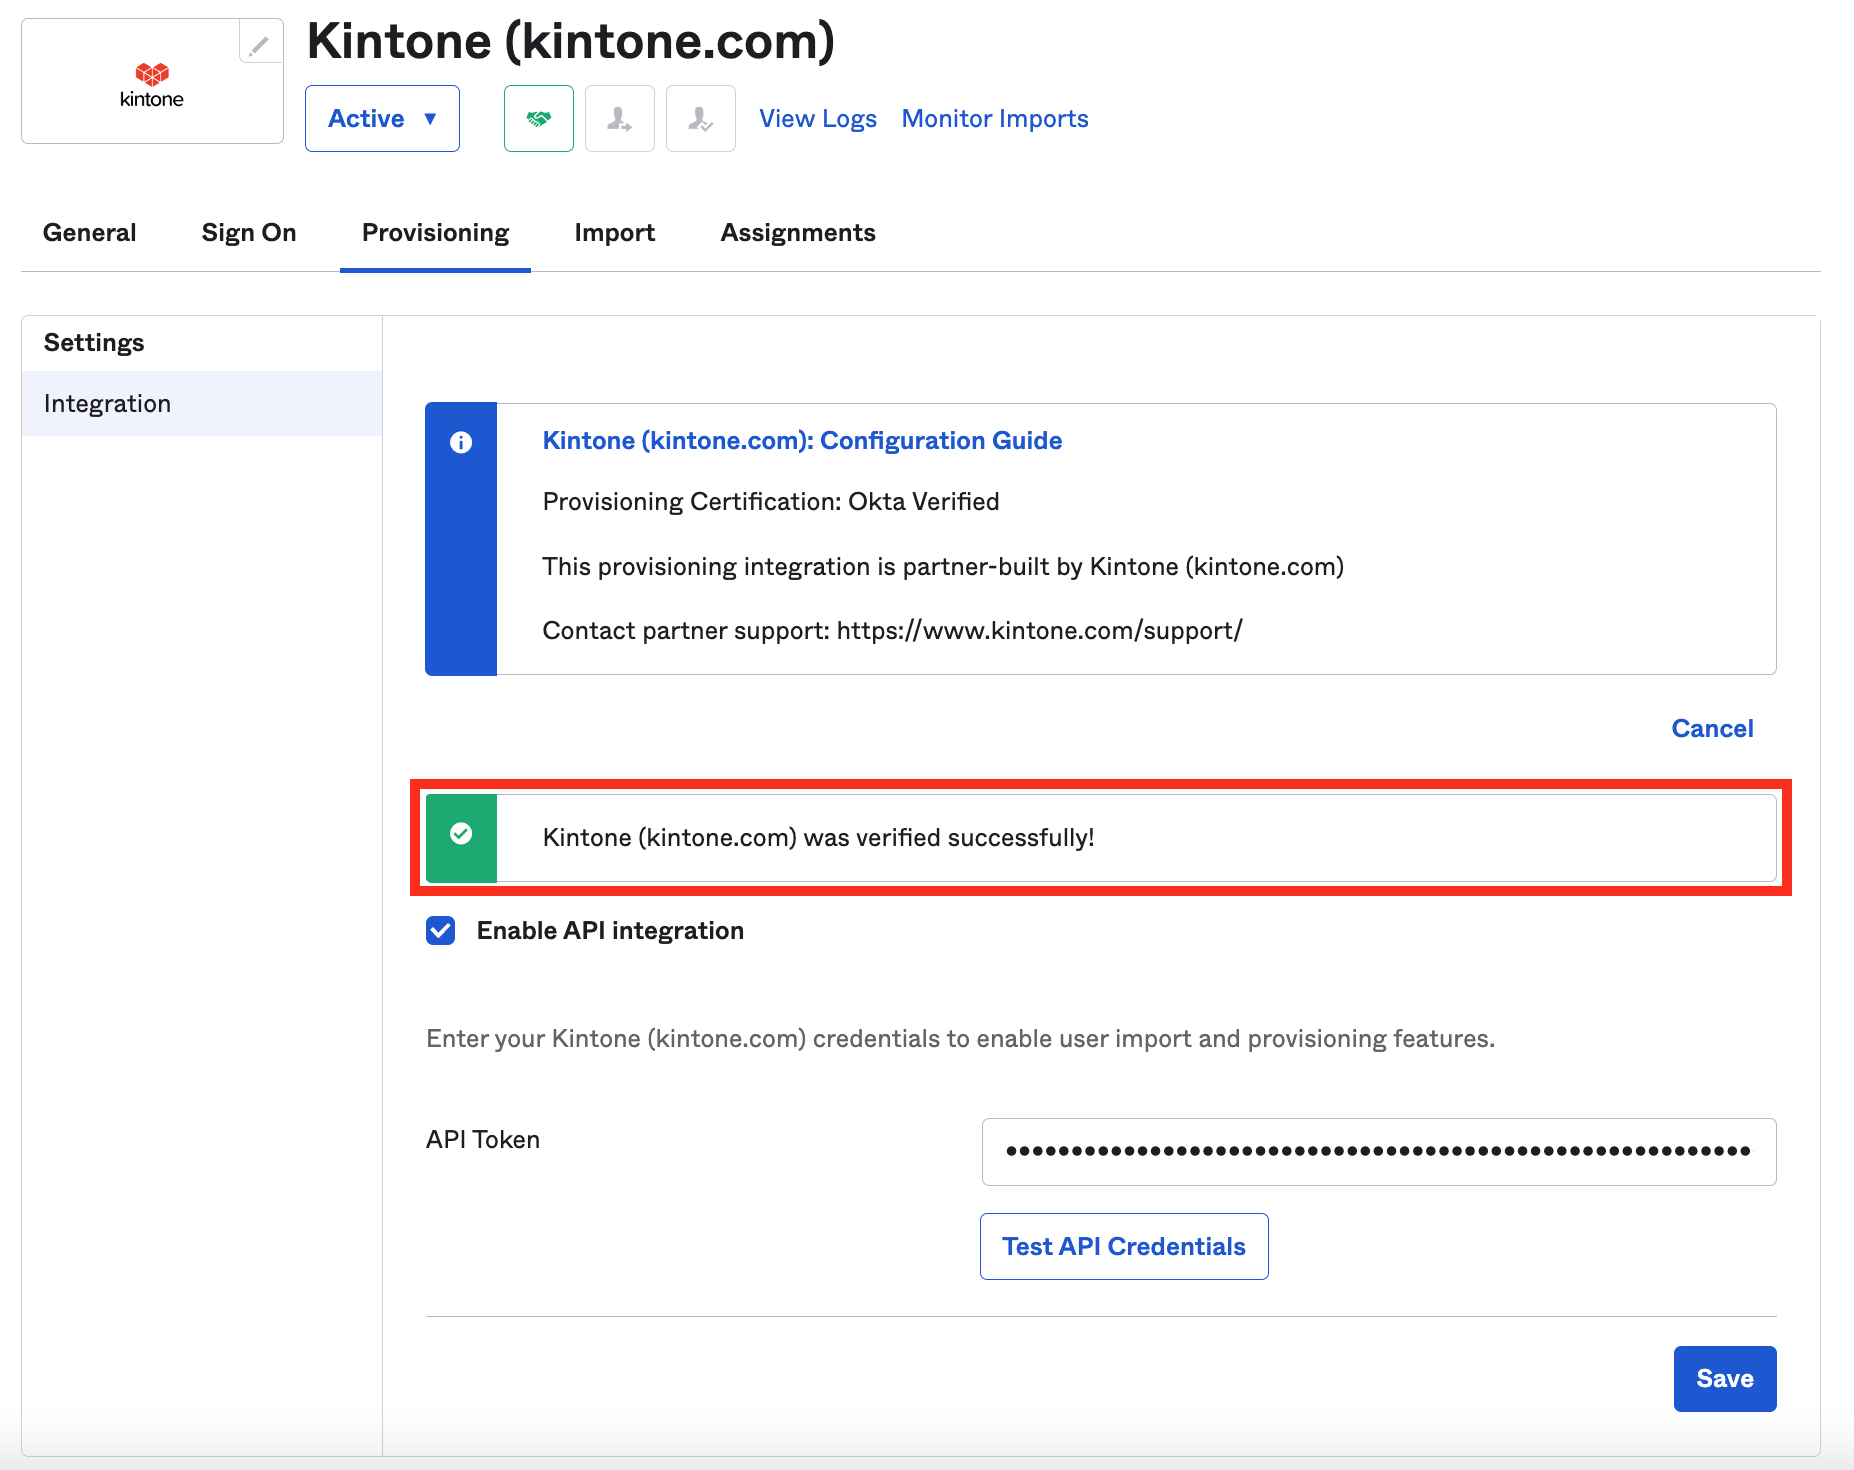 Screenshot: A message displayed stating that the Kintone integration was verified successfully